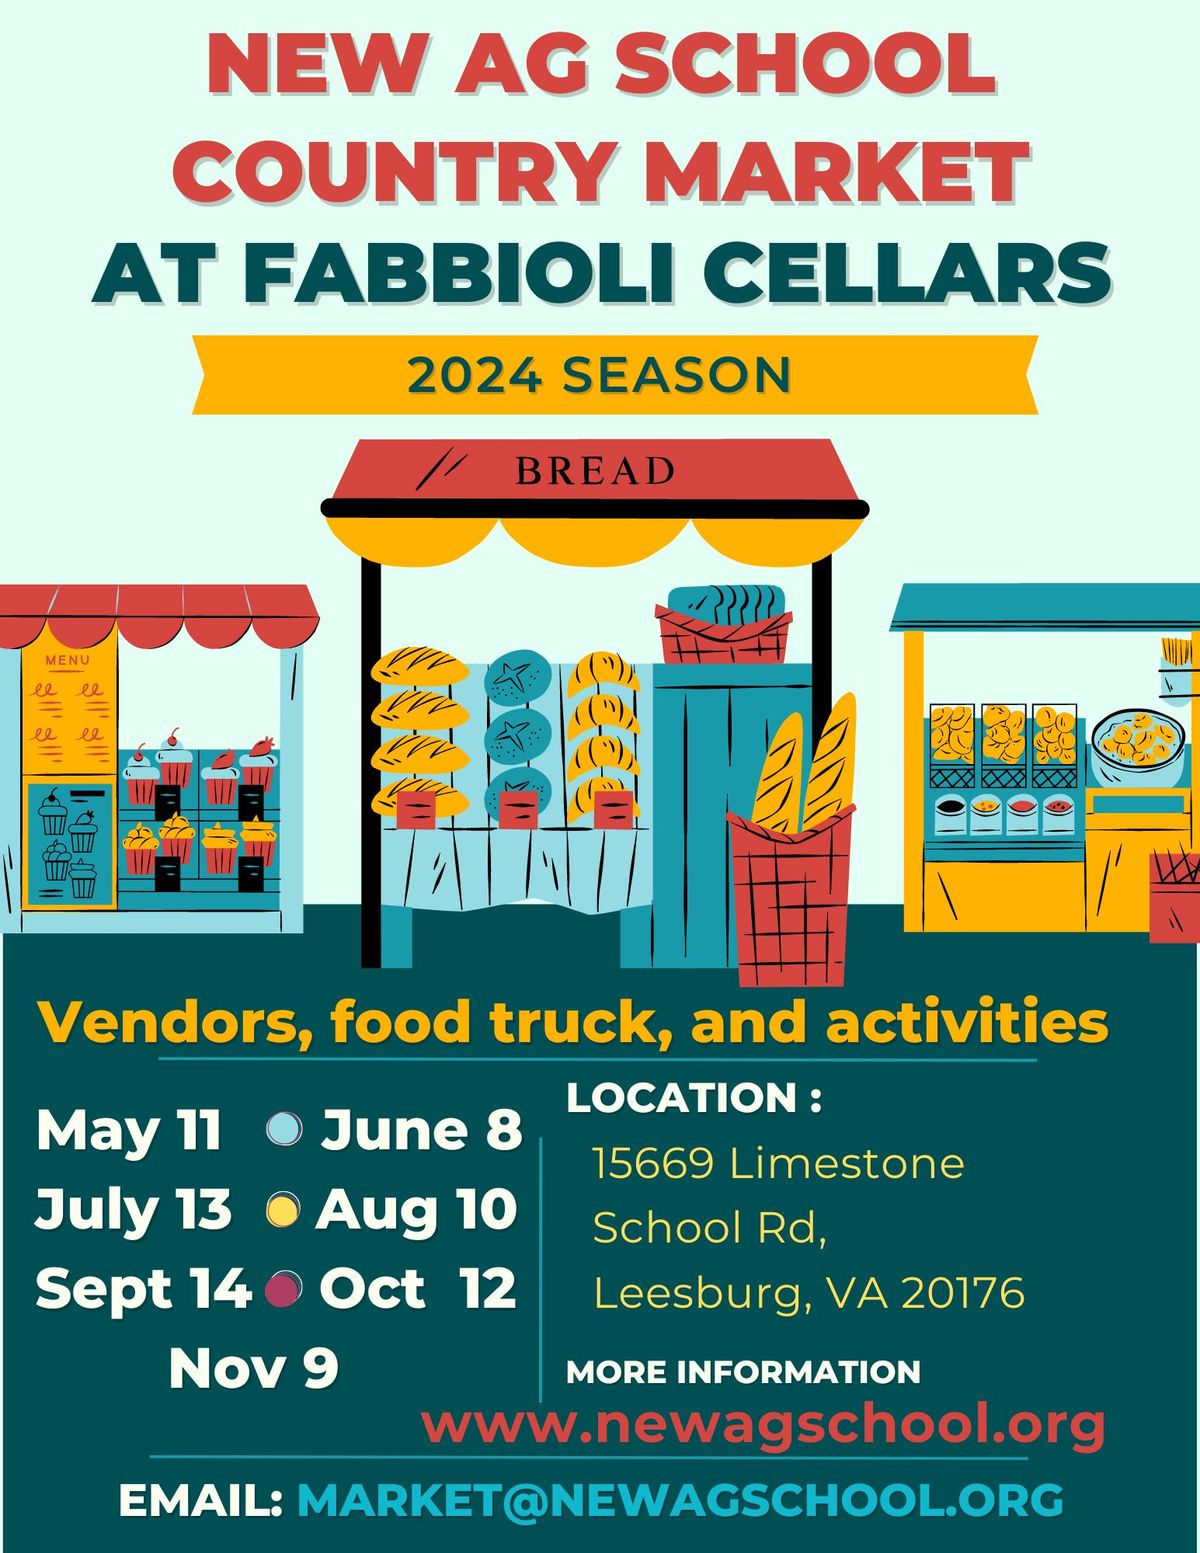 The New Ag School Country Market at Fabbioli Cellars